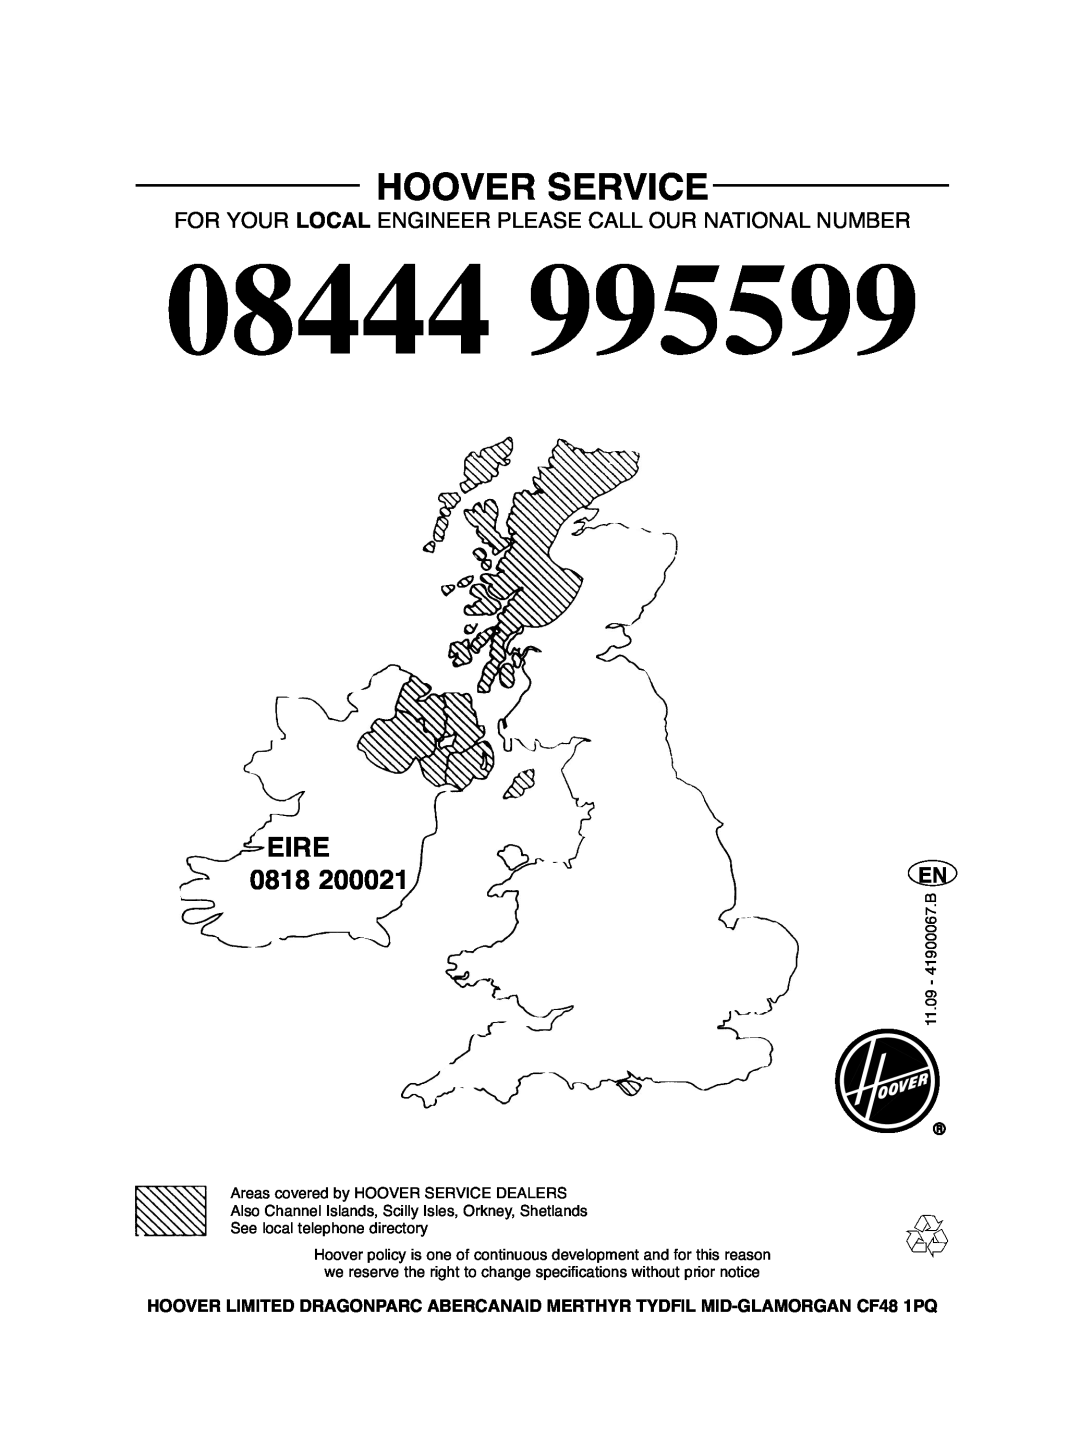 Hoover DDY 062 manual 08444, Hoover Service, Eire, Areas covered by HOOVER SERVICE DEALERS, See local telephone directory 